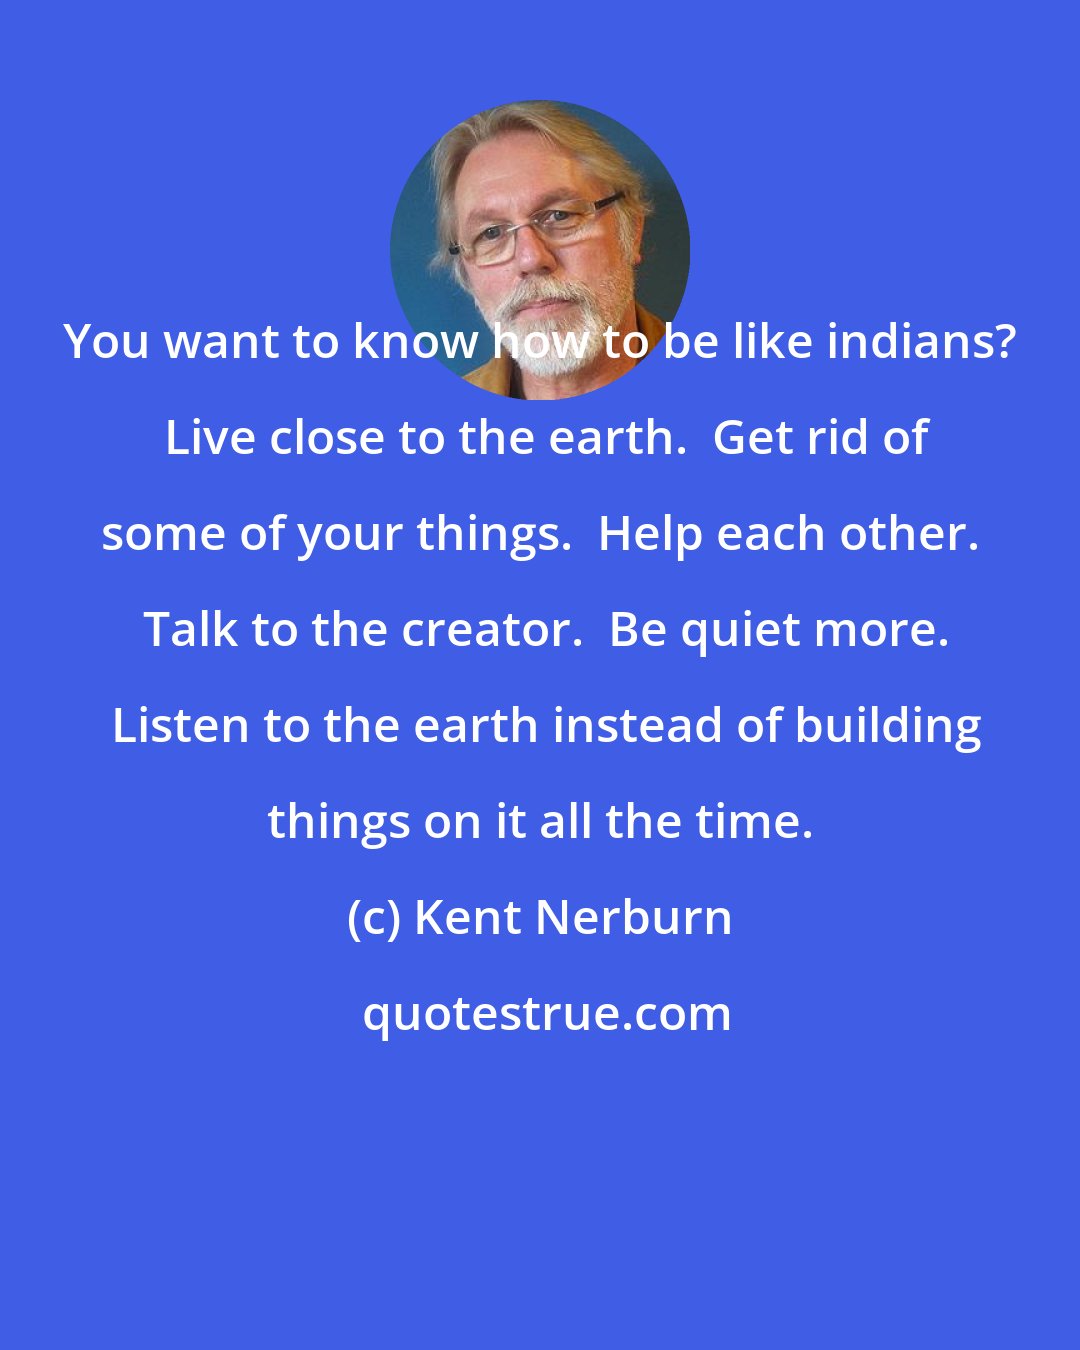 Kent Nerburn: You want to know how to be like indians?  Live close to the earth.  Get rid of some of your things.  Help each other.  Talk to the creator.  Be quiet more.  Listen to the earth instead of building things on it all the time.